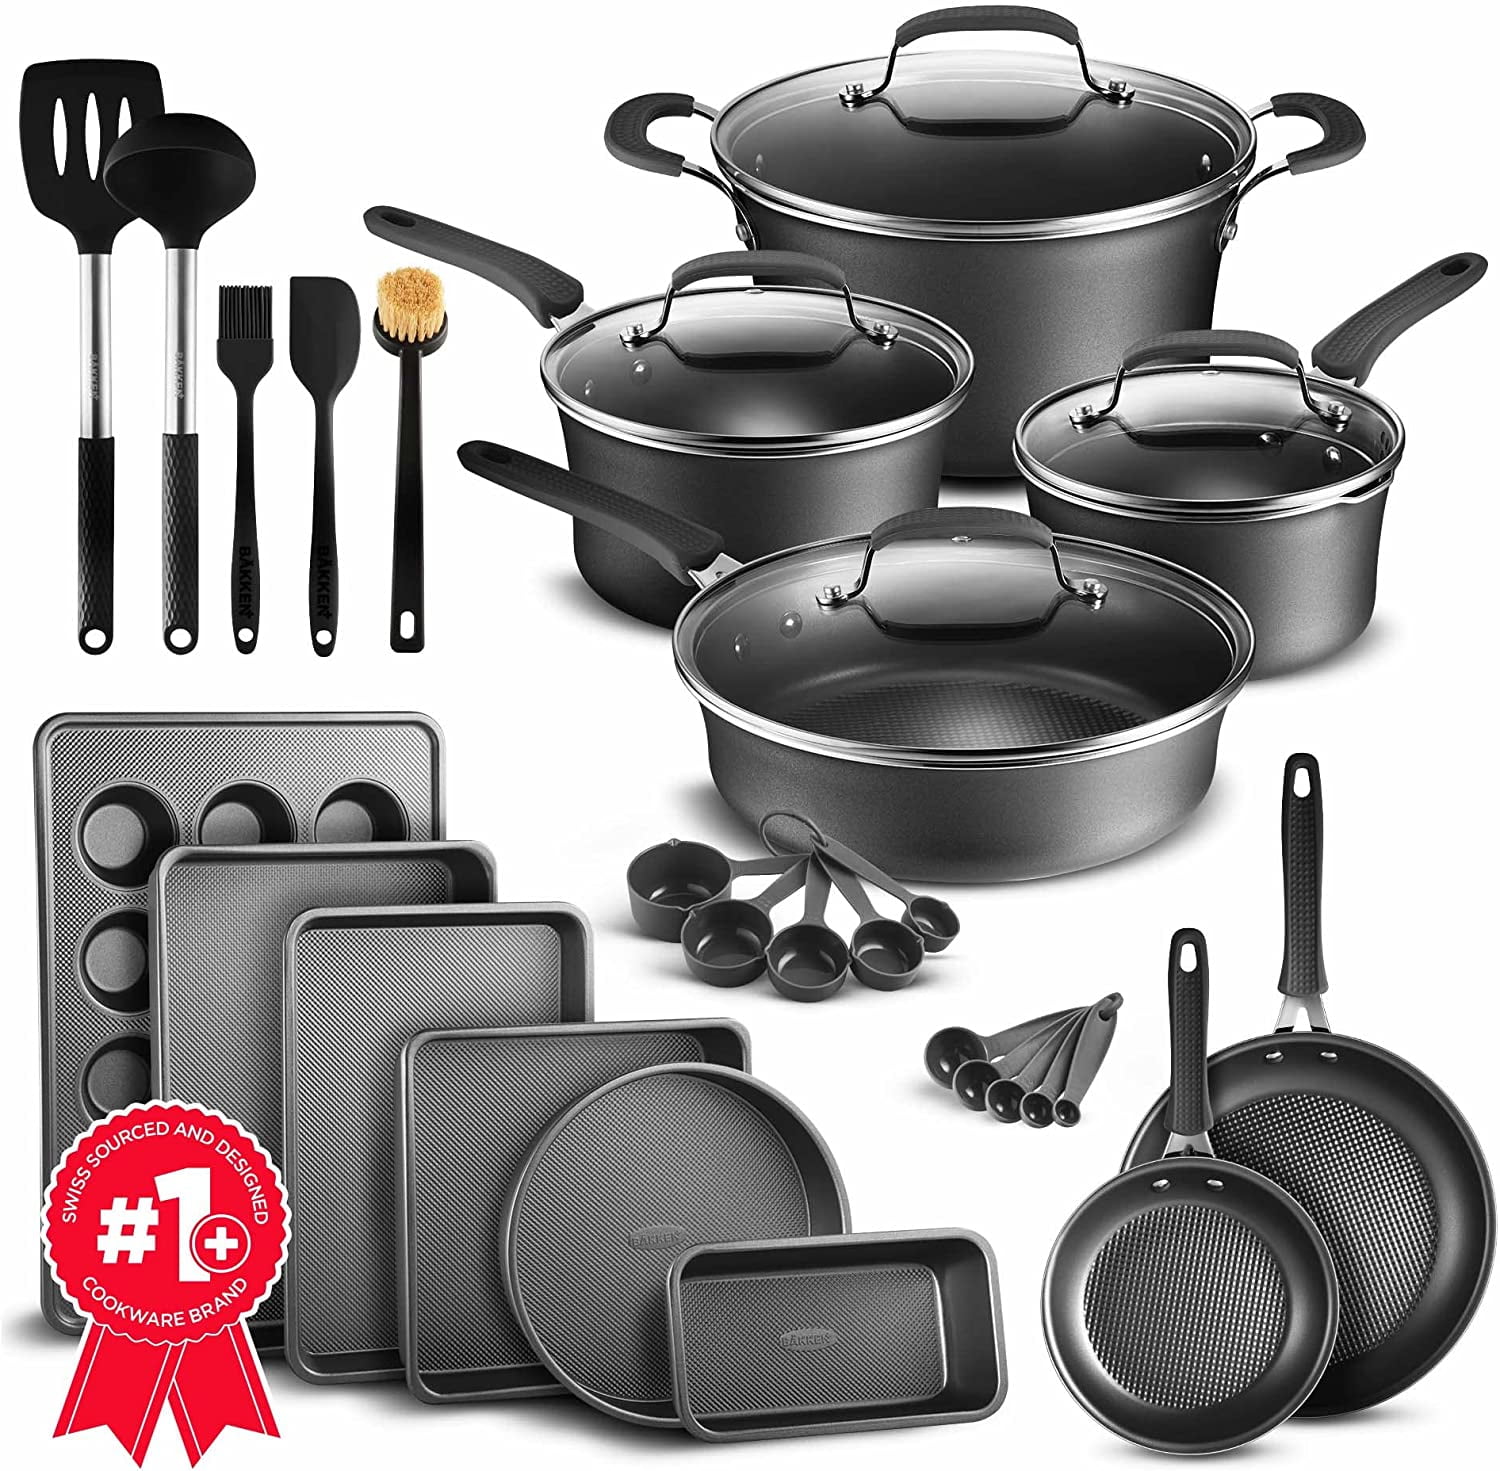 Great Gatherings Black 40-Piece Expanded Cookware Set